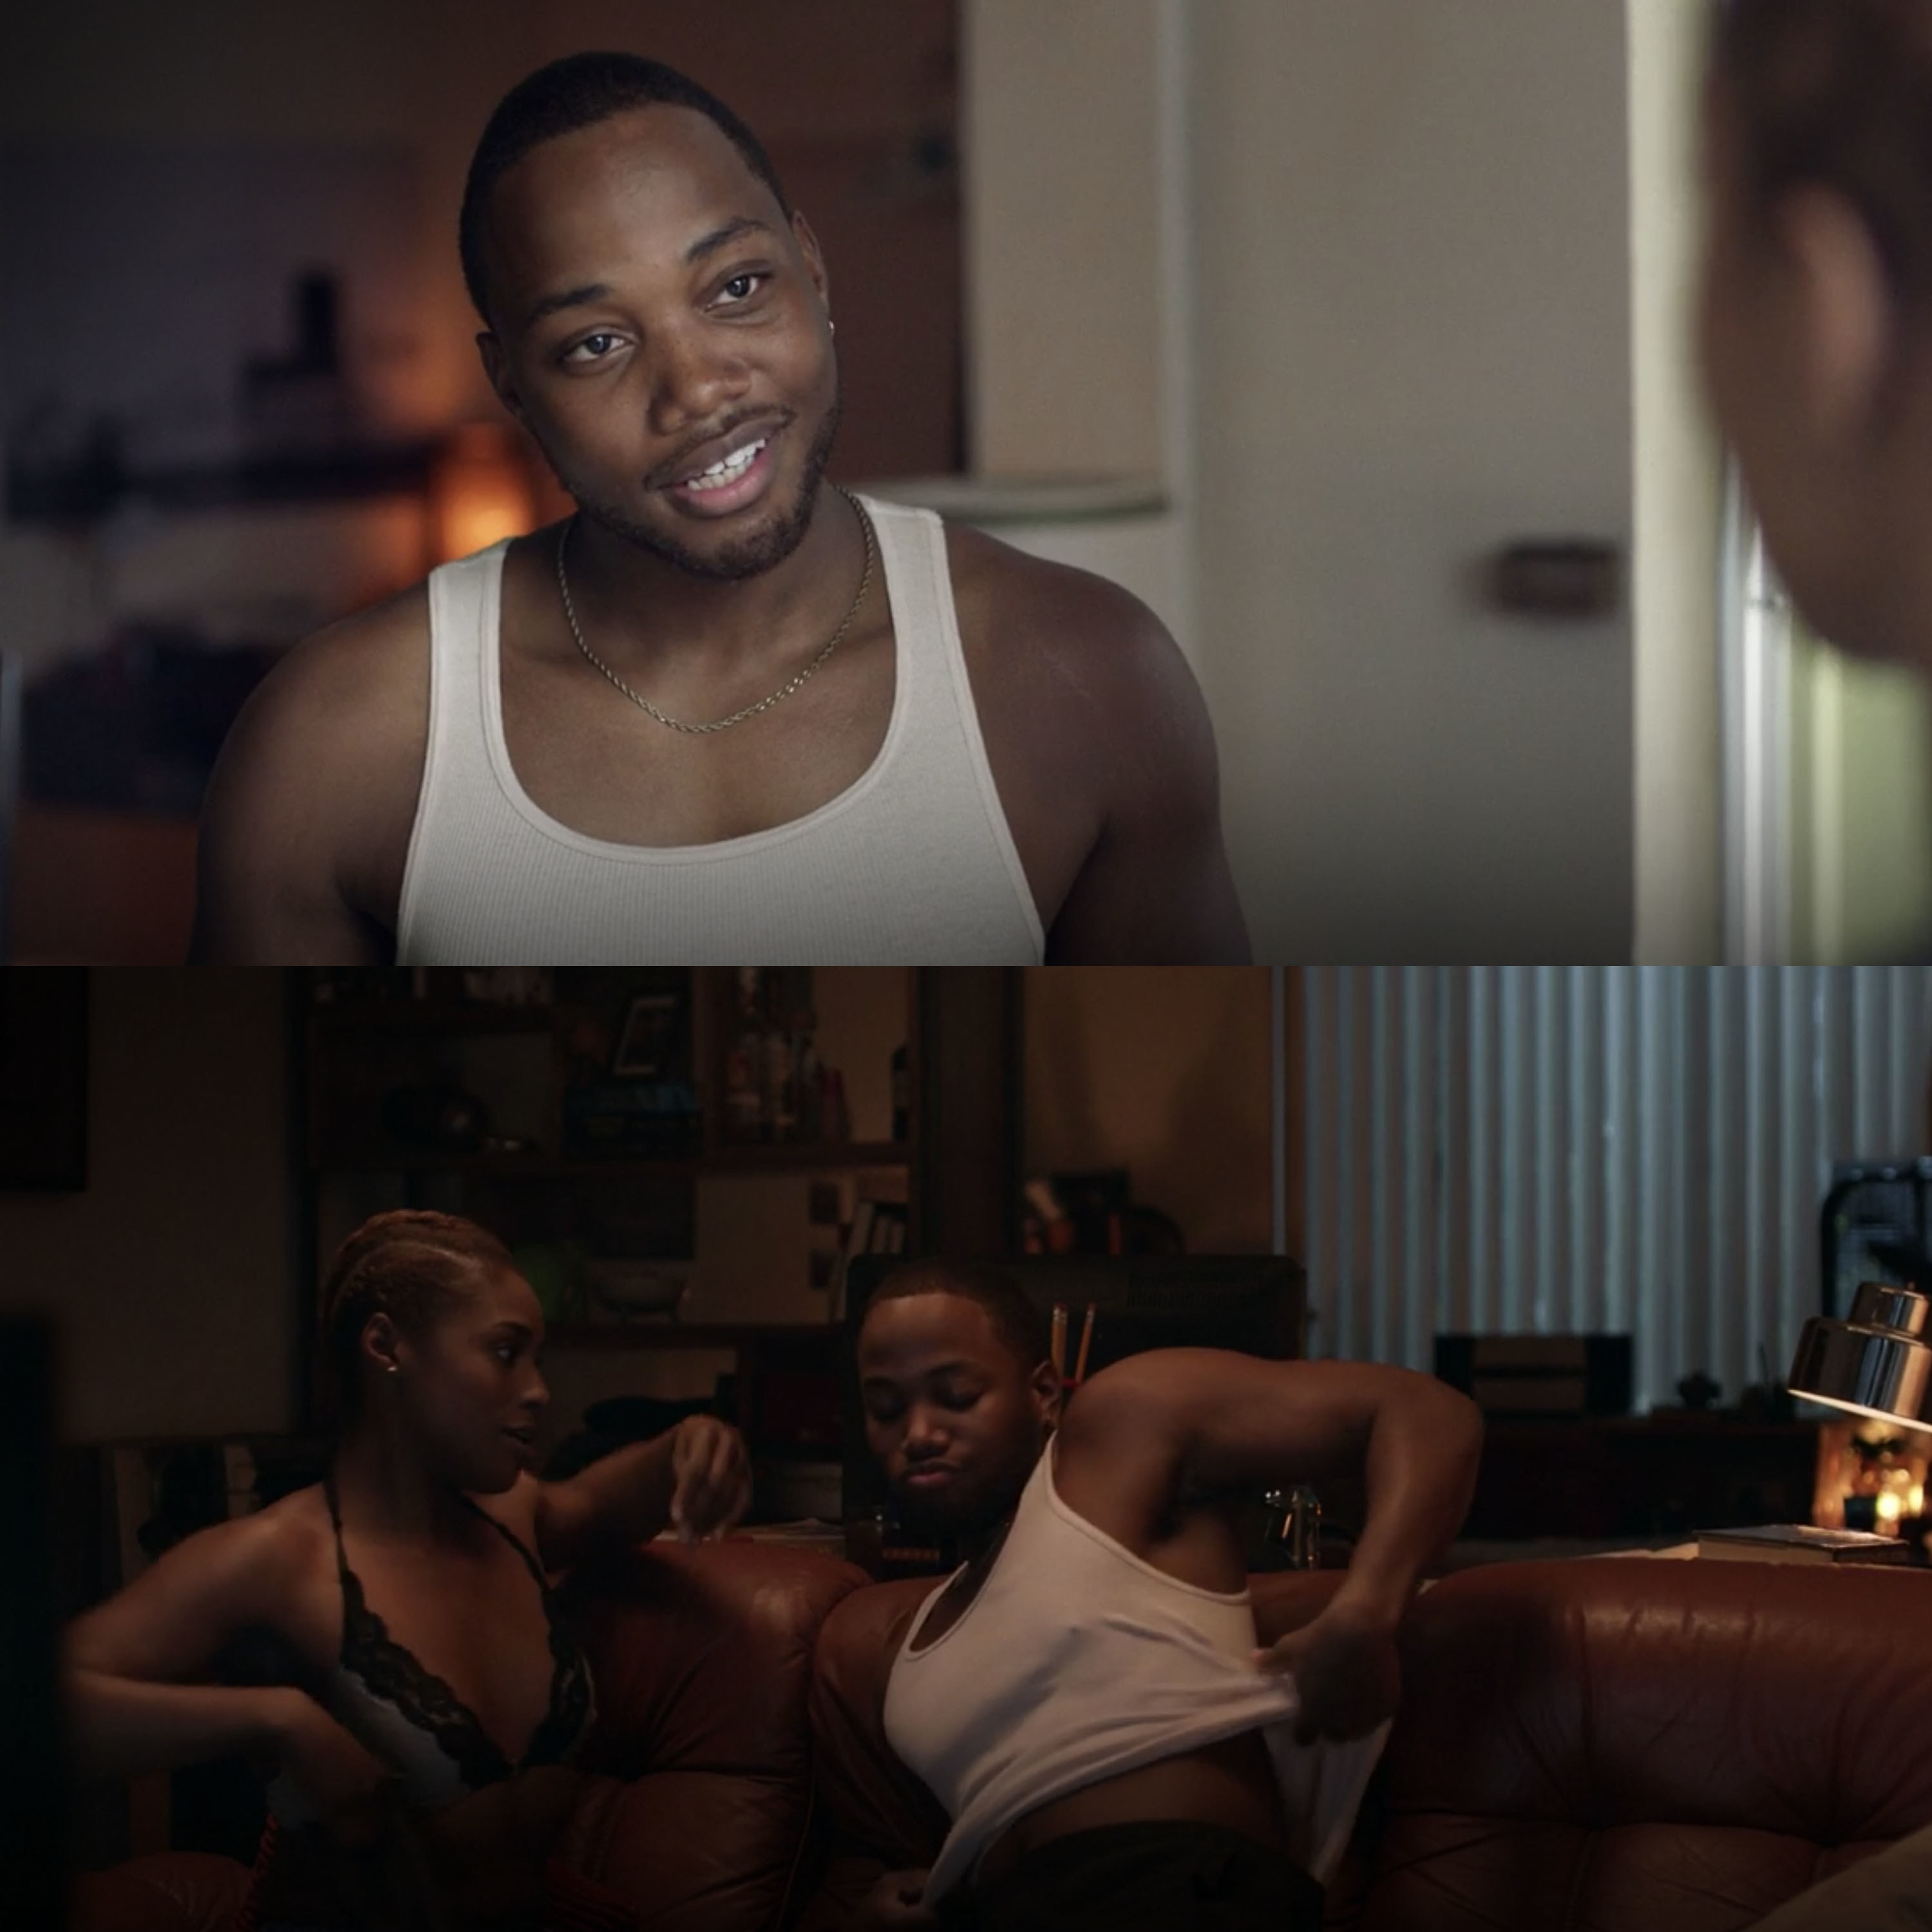 Leon Thomas as Eddie takes off his shirt after Issa&#x27;s removed her top in &quot;Insecure&quot;